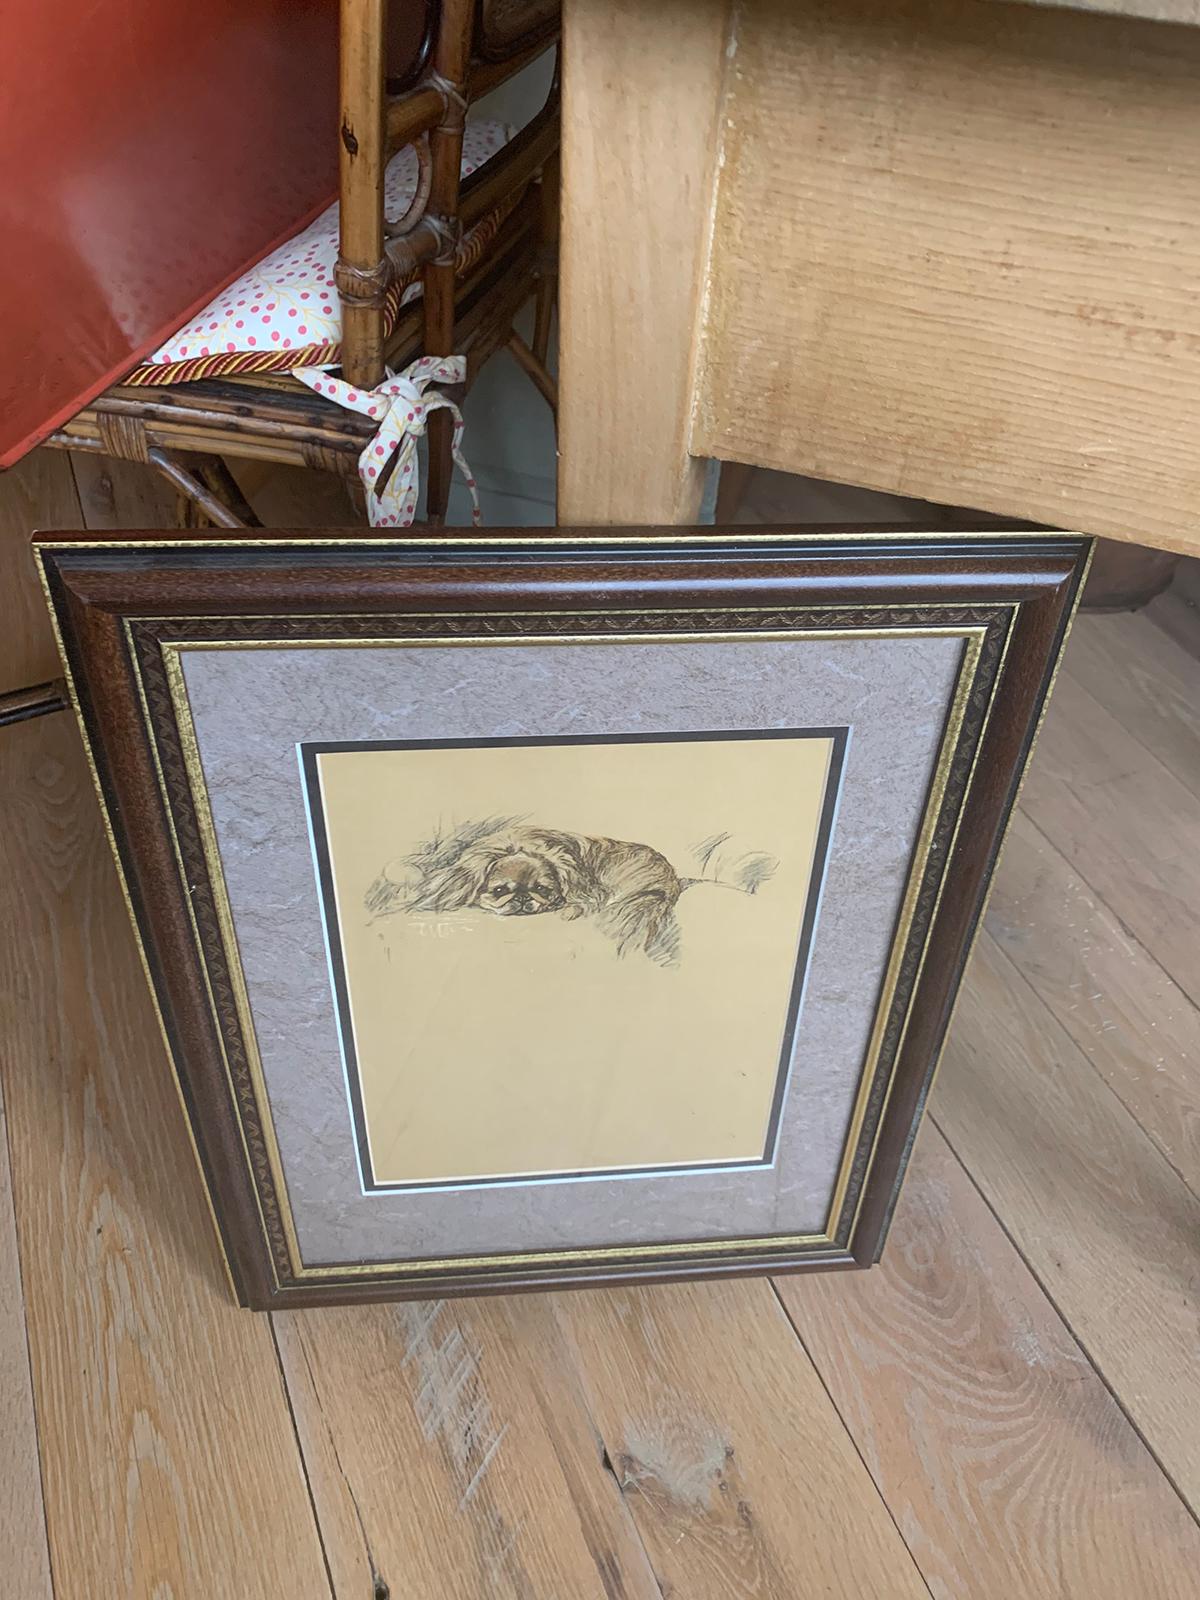 Paper 20th Century Engraving of Pekingese in Giltwood Frame, Unsigned